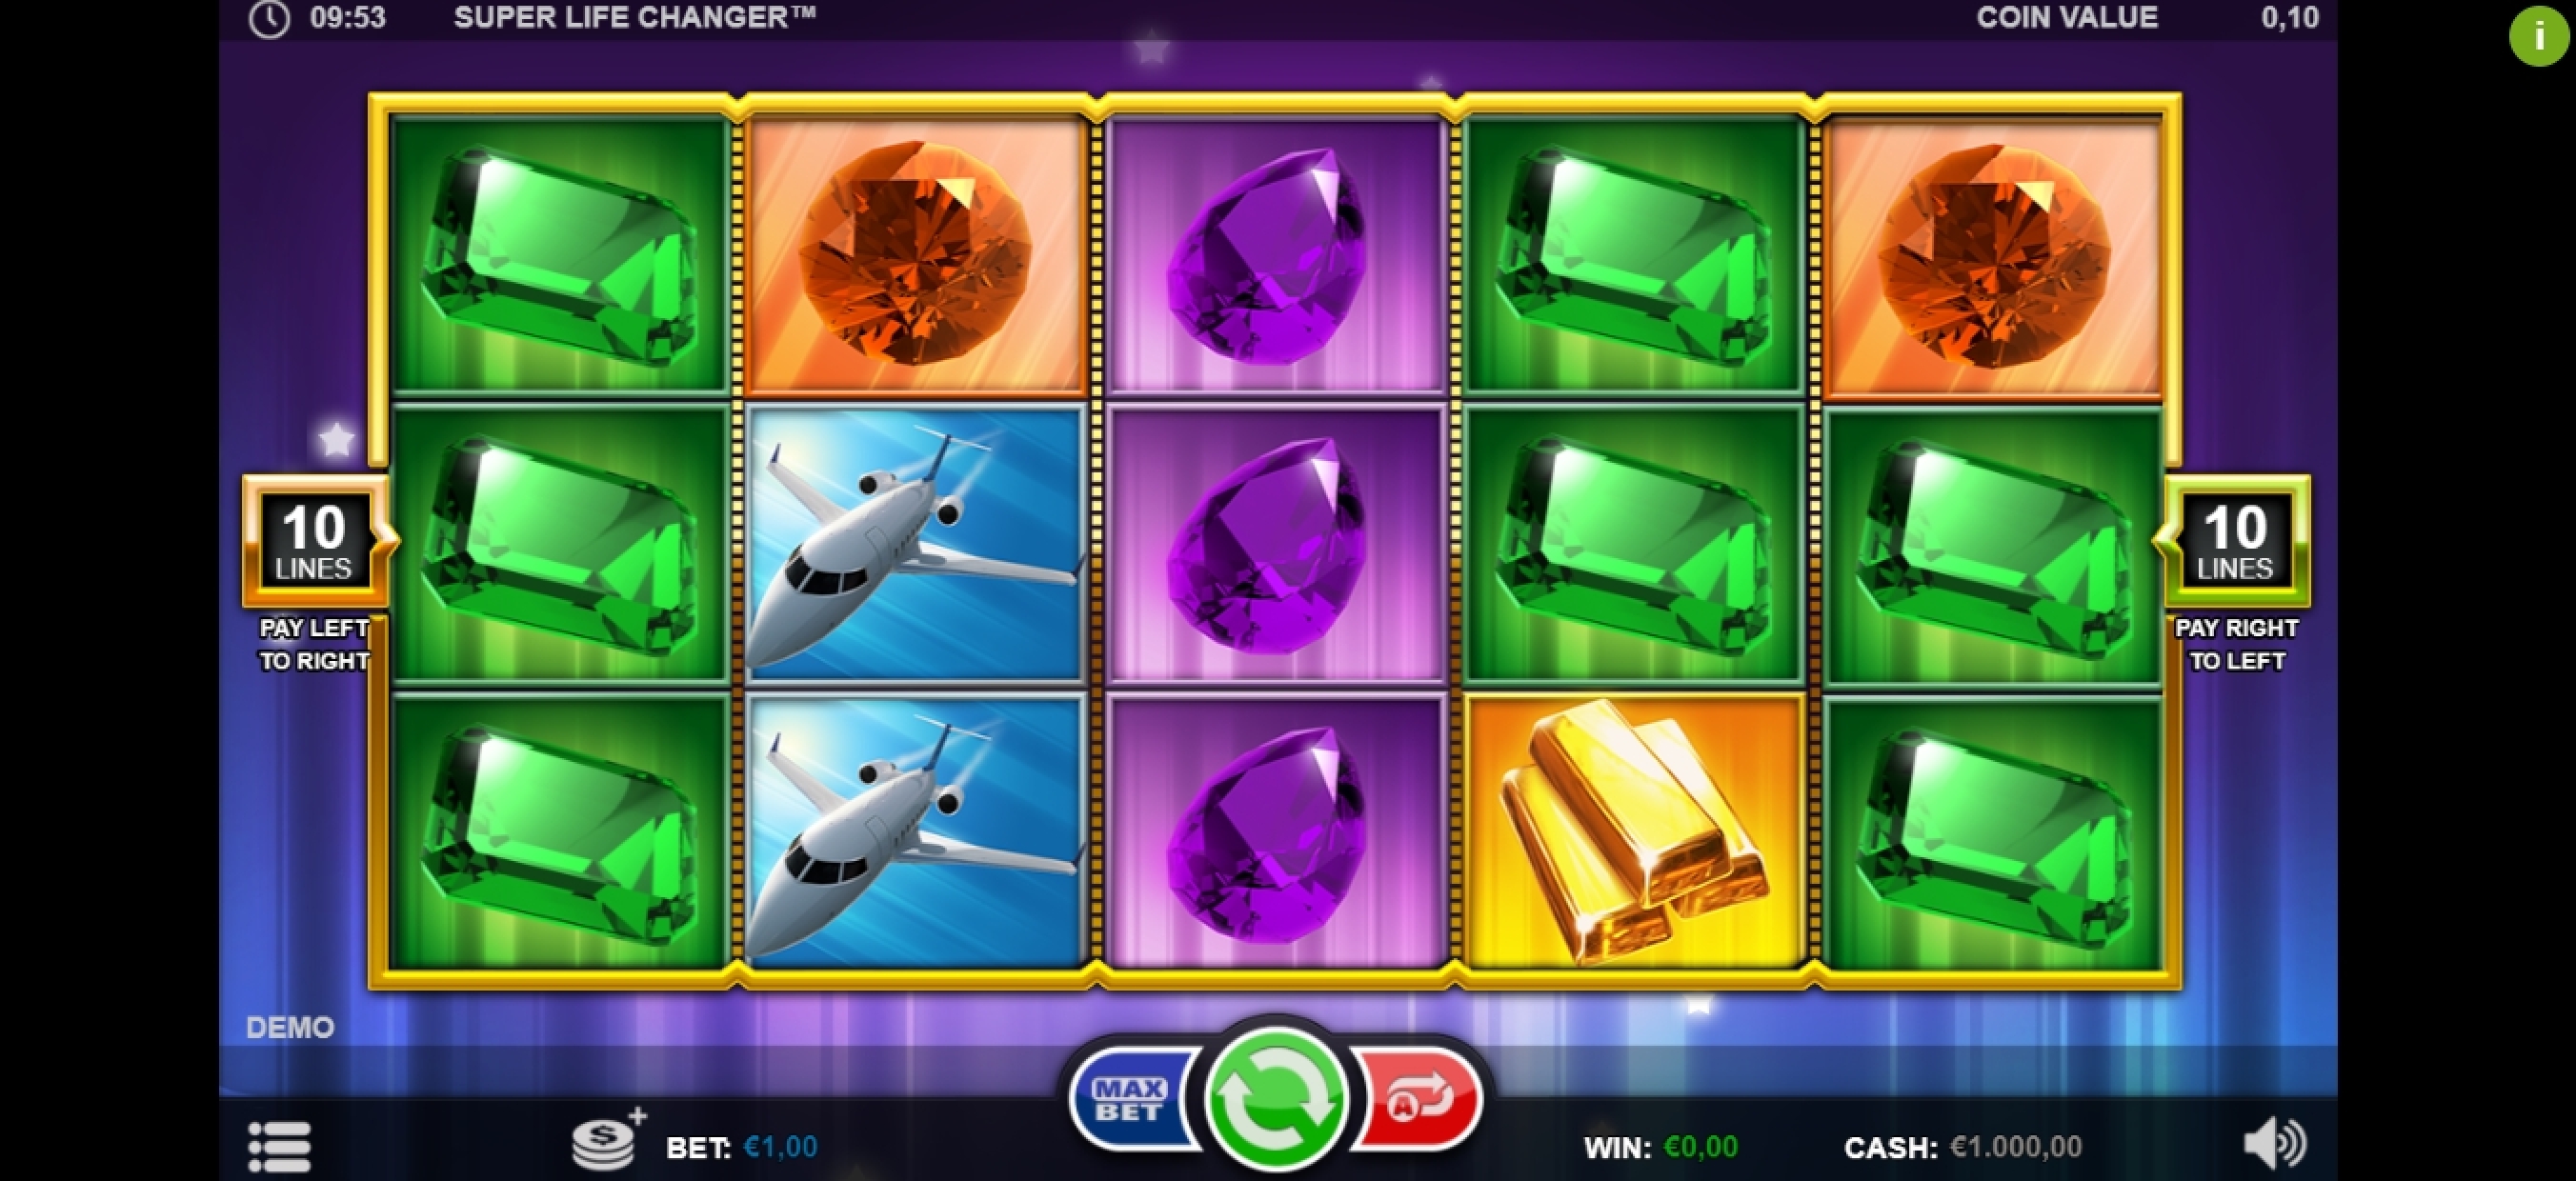 Reels in Super Life Changer Slot Game by Betsson Group